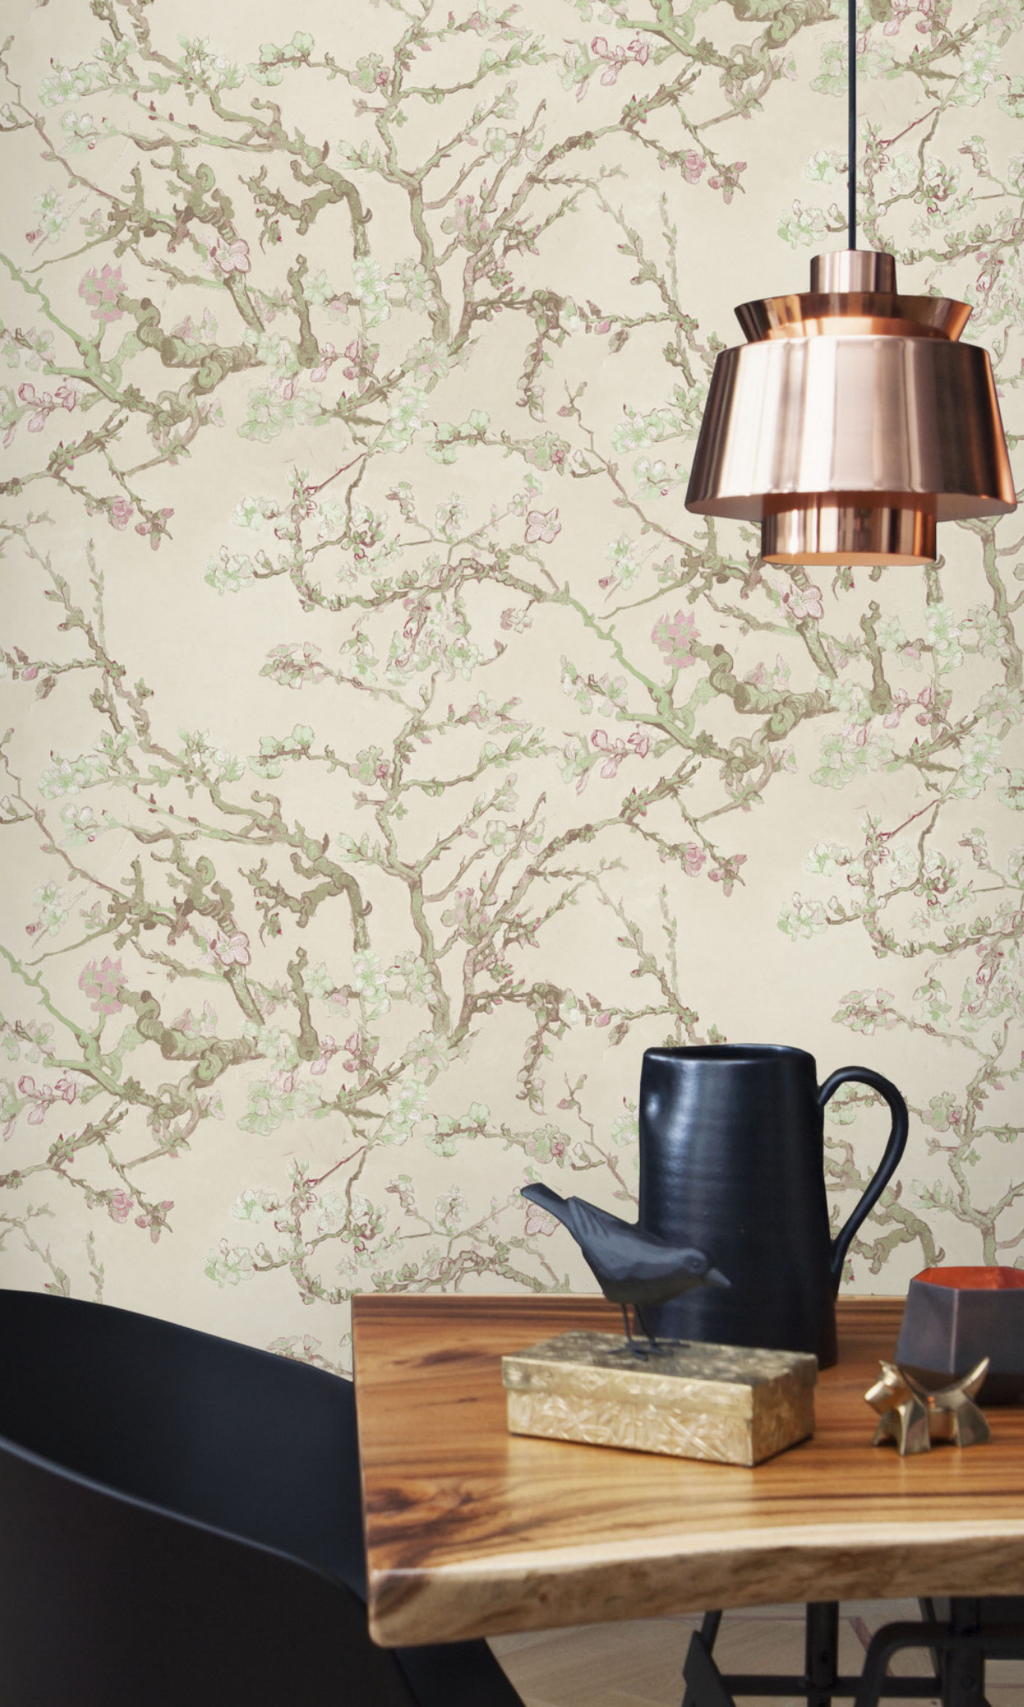 Classic wallpaper  Historical patterns of important style epochs